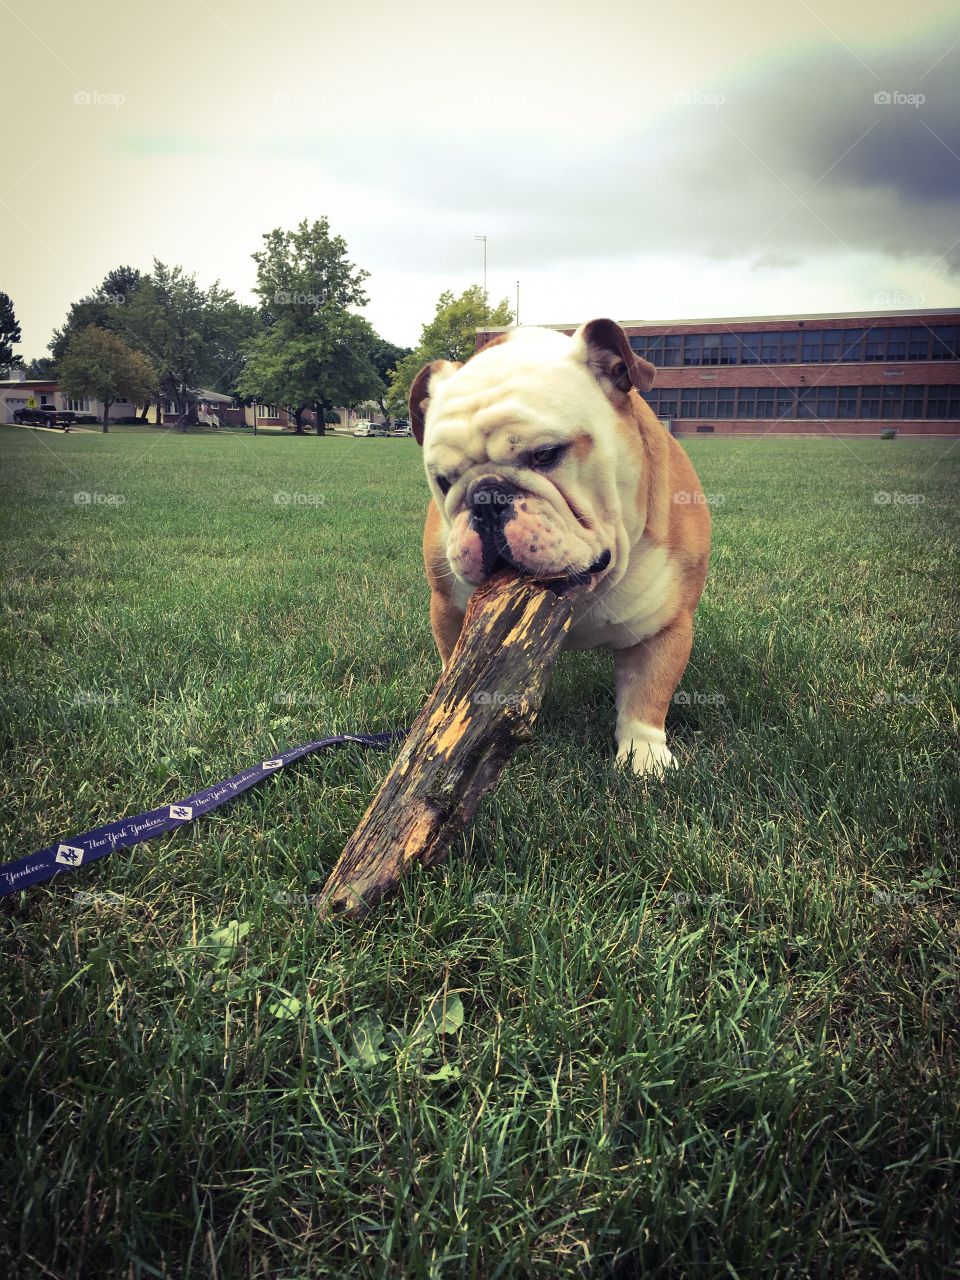 Our English Bulldog Bronx enjoys running around the park with the kids and fetching sticks!! 